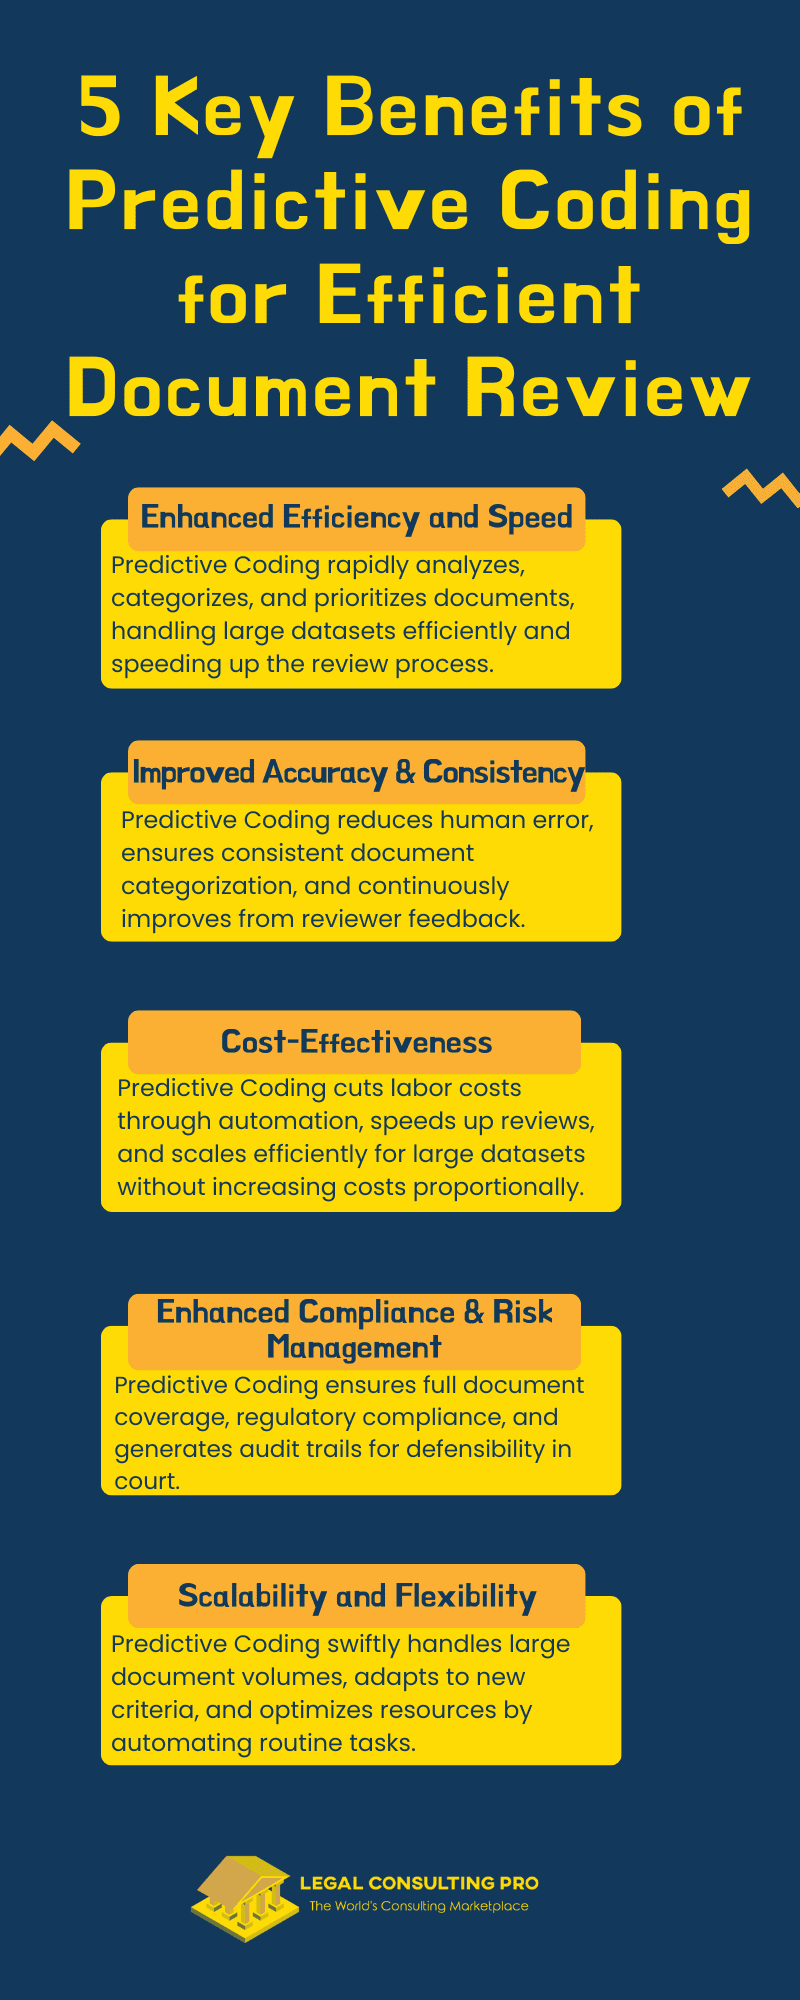 5 Key Benefits of Predictive Coding for Efficient Document Review Infographic